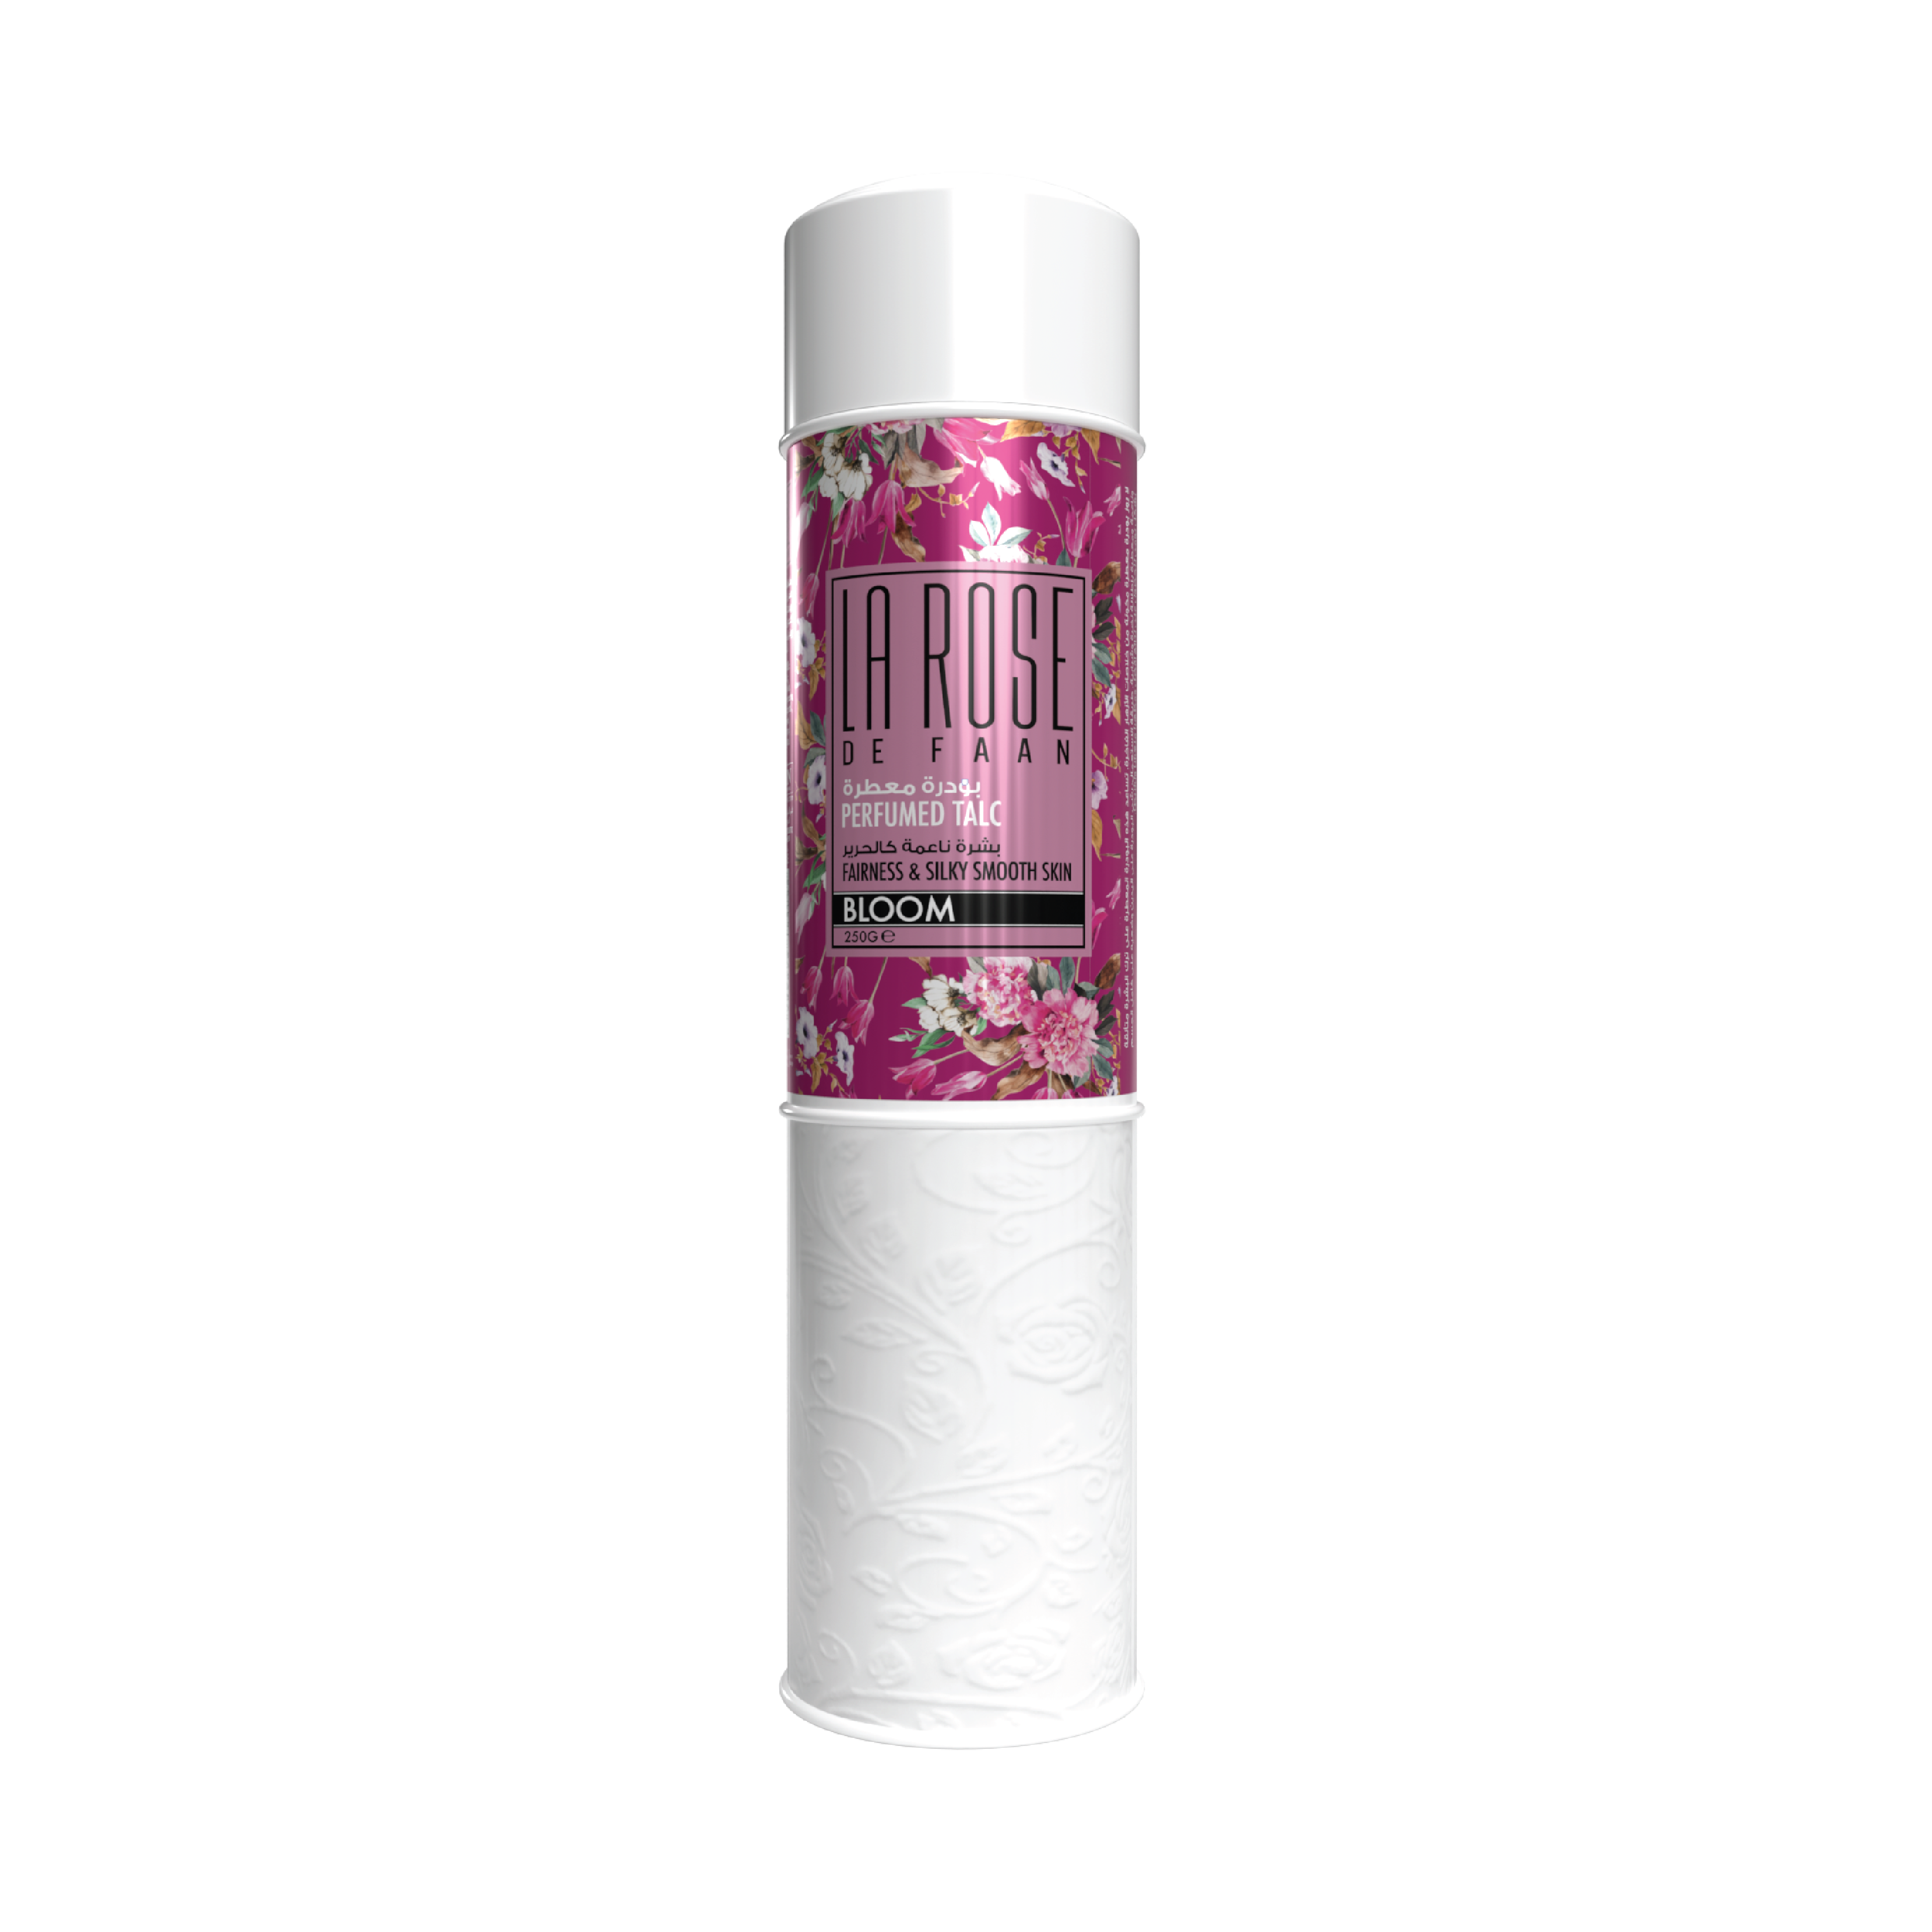 Indulge in Luxurious Softness with LA ROSE's Perfumed Talc Bloom